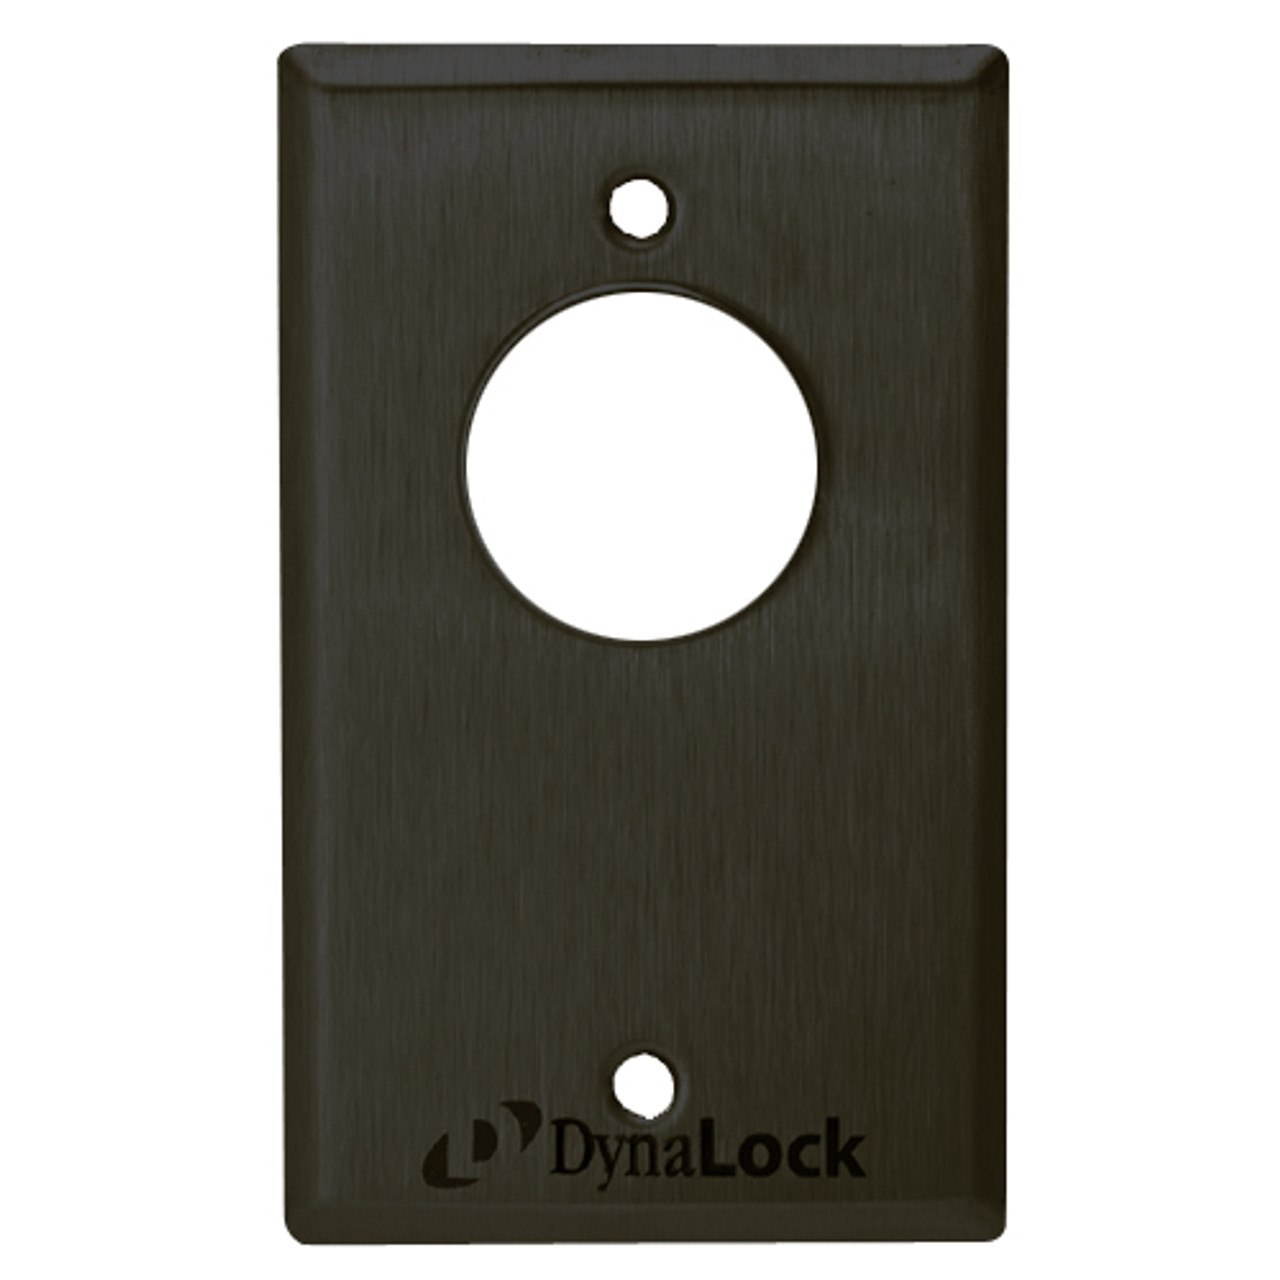 7024-US10B DynaLock 7000 Series Keyswitches Momentary 2 Double Pole Double Throw in Oil Rubbed Bronze